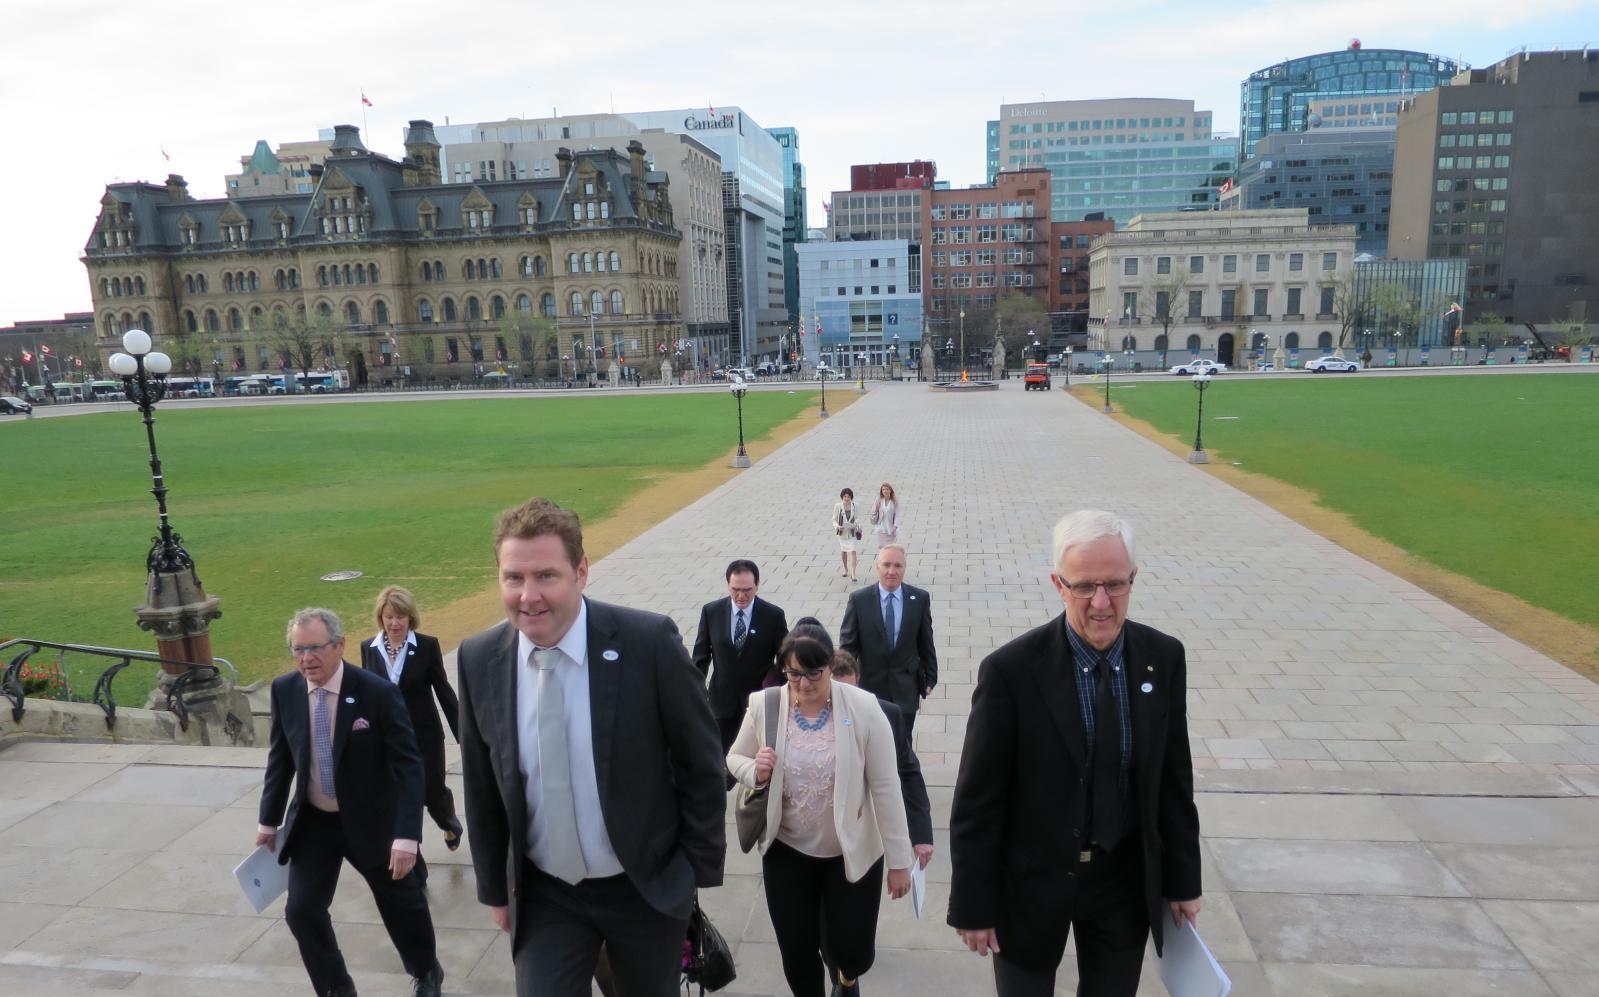 CAO Council walking uo the steps of parliament